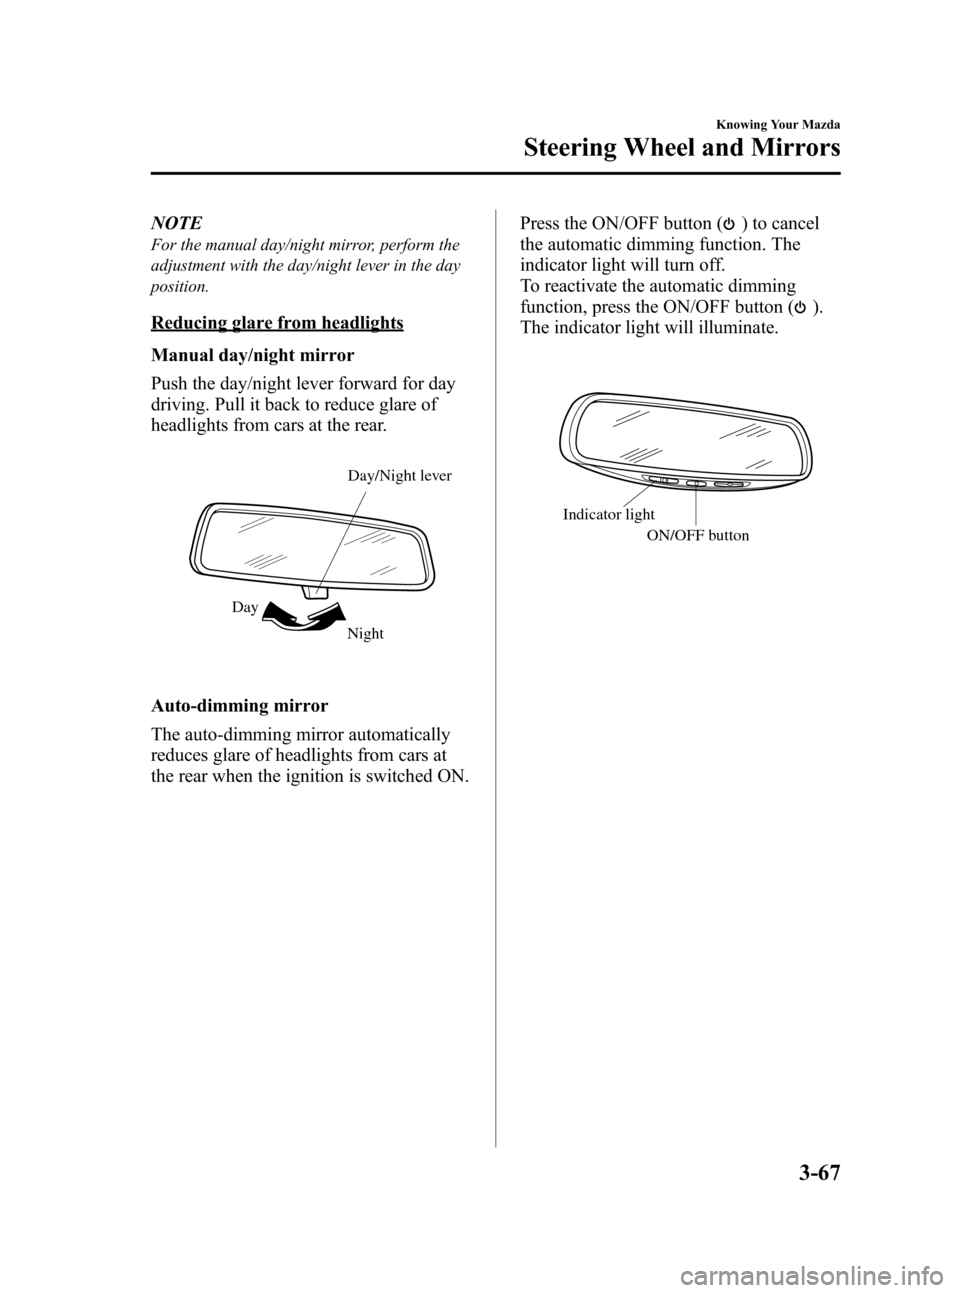 MAZDA MODEL 3 HATCHBACK 2010  Owners Manual (in English) Black plate (143,1)
NOTE
For the manual day/night mirror, perform the
adjustment with the day/night lever in the day
position.
Reducing glare from headlights
Manual day/night mirror
Push the day/night